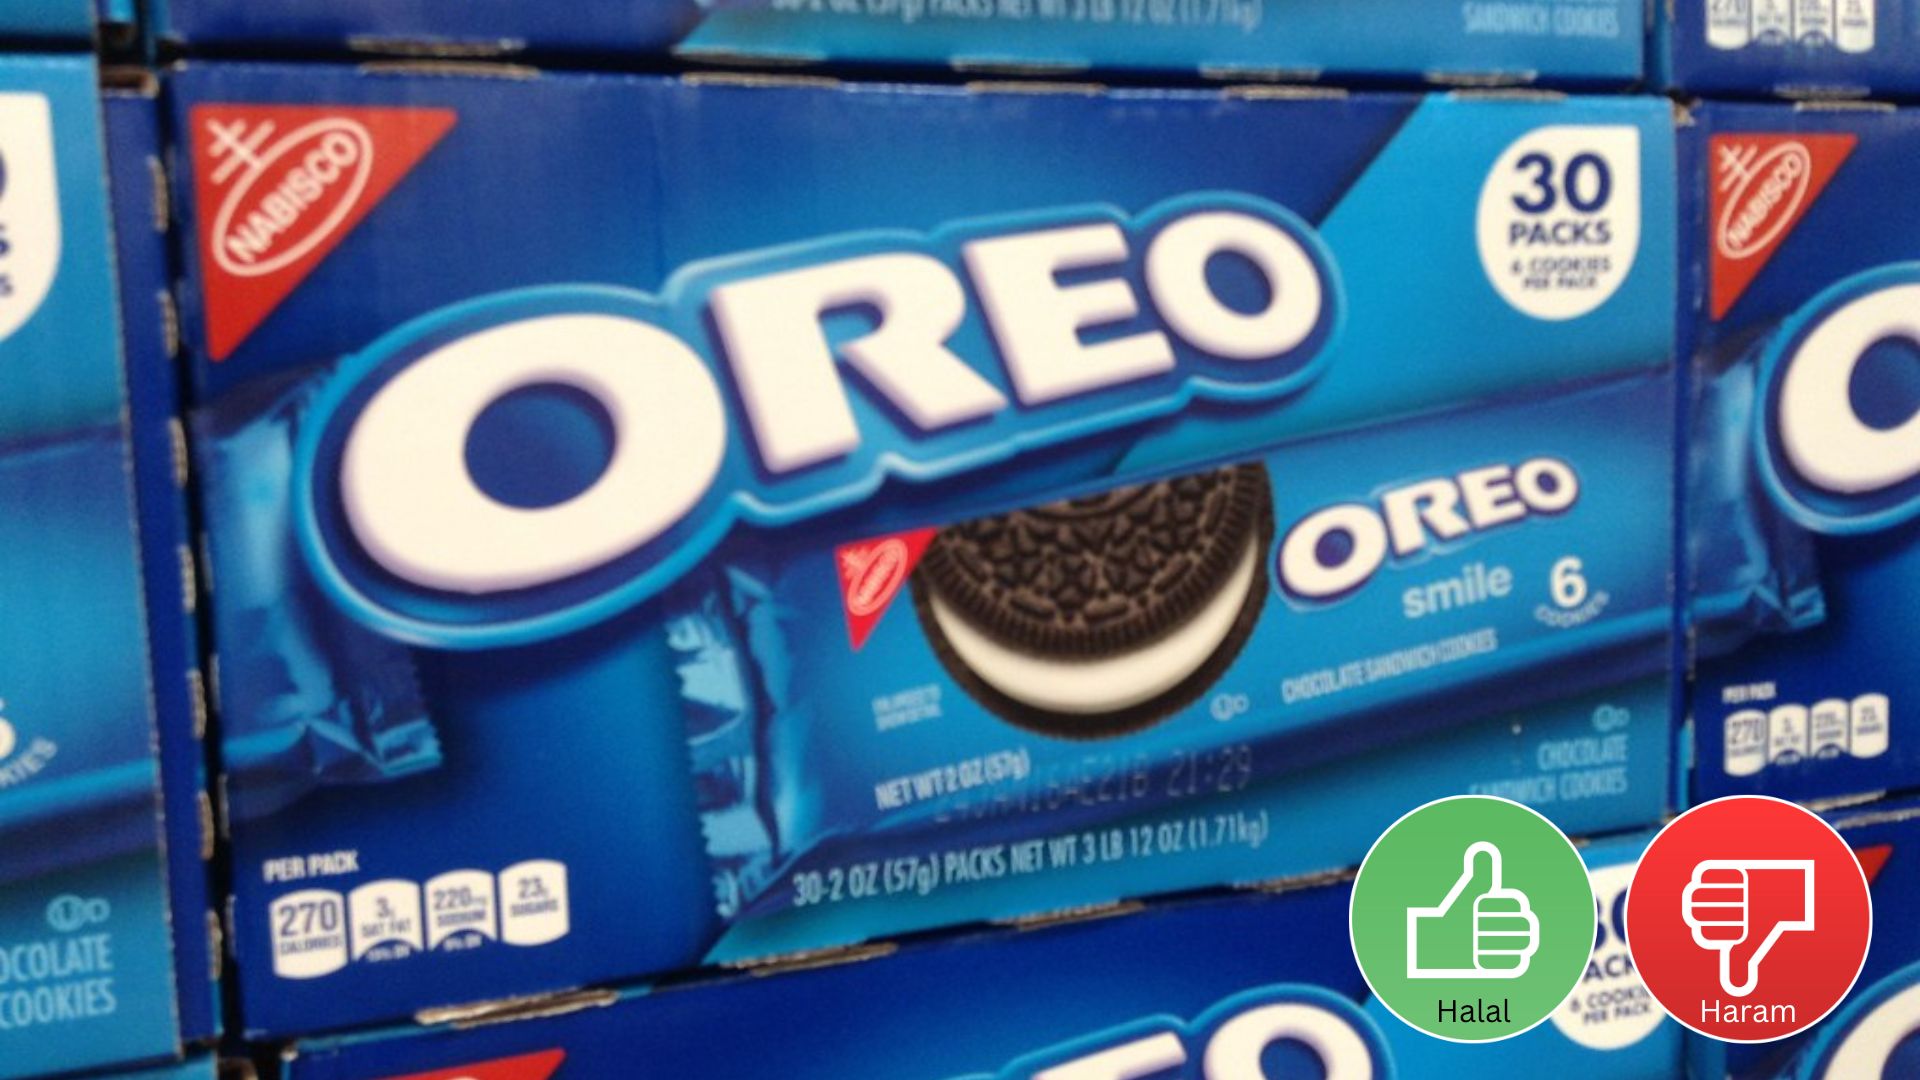 Is Oreo Halal or Haram in Islam? Can Muslims eat Oreo Biscuits?